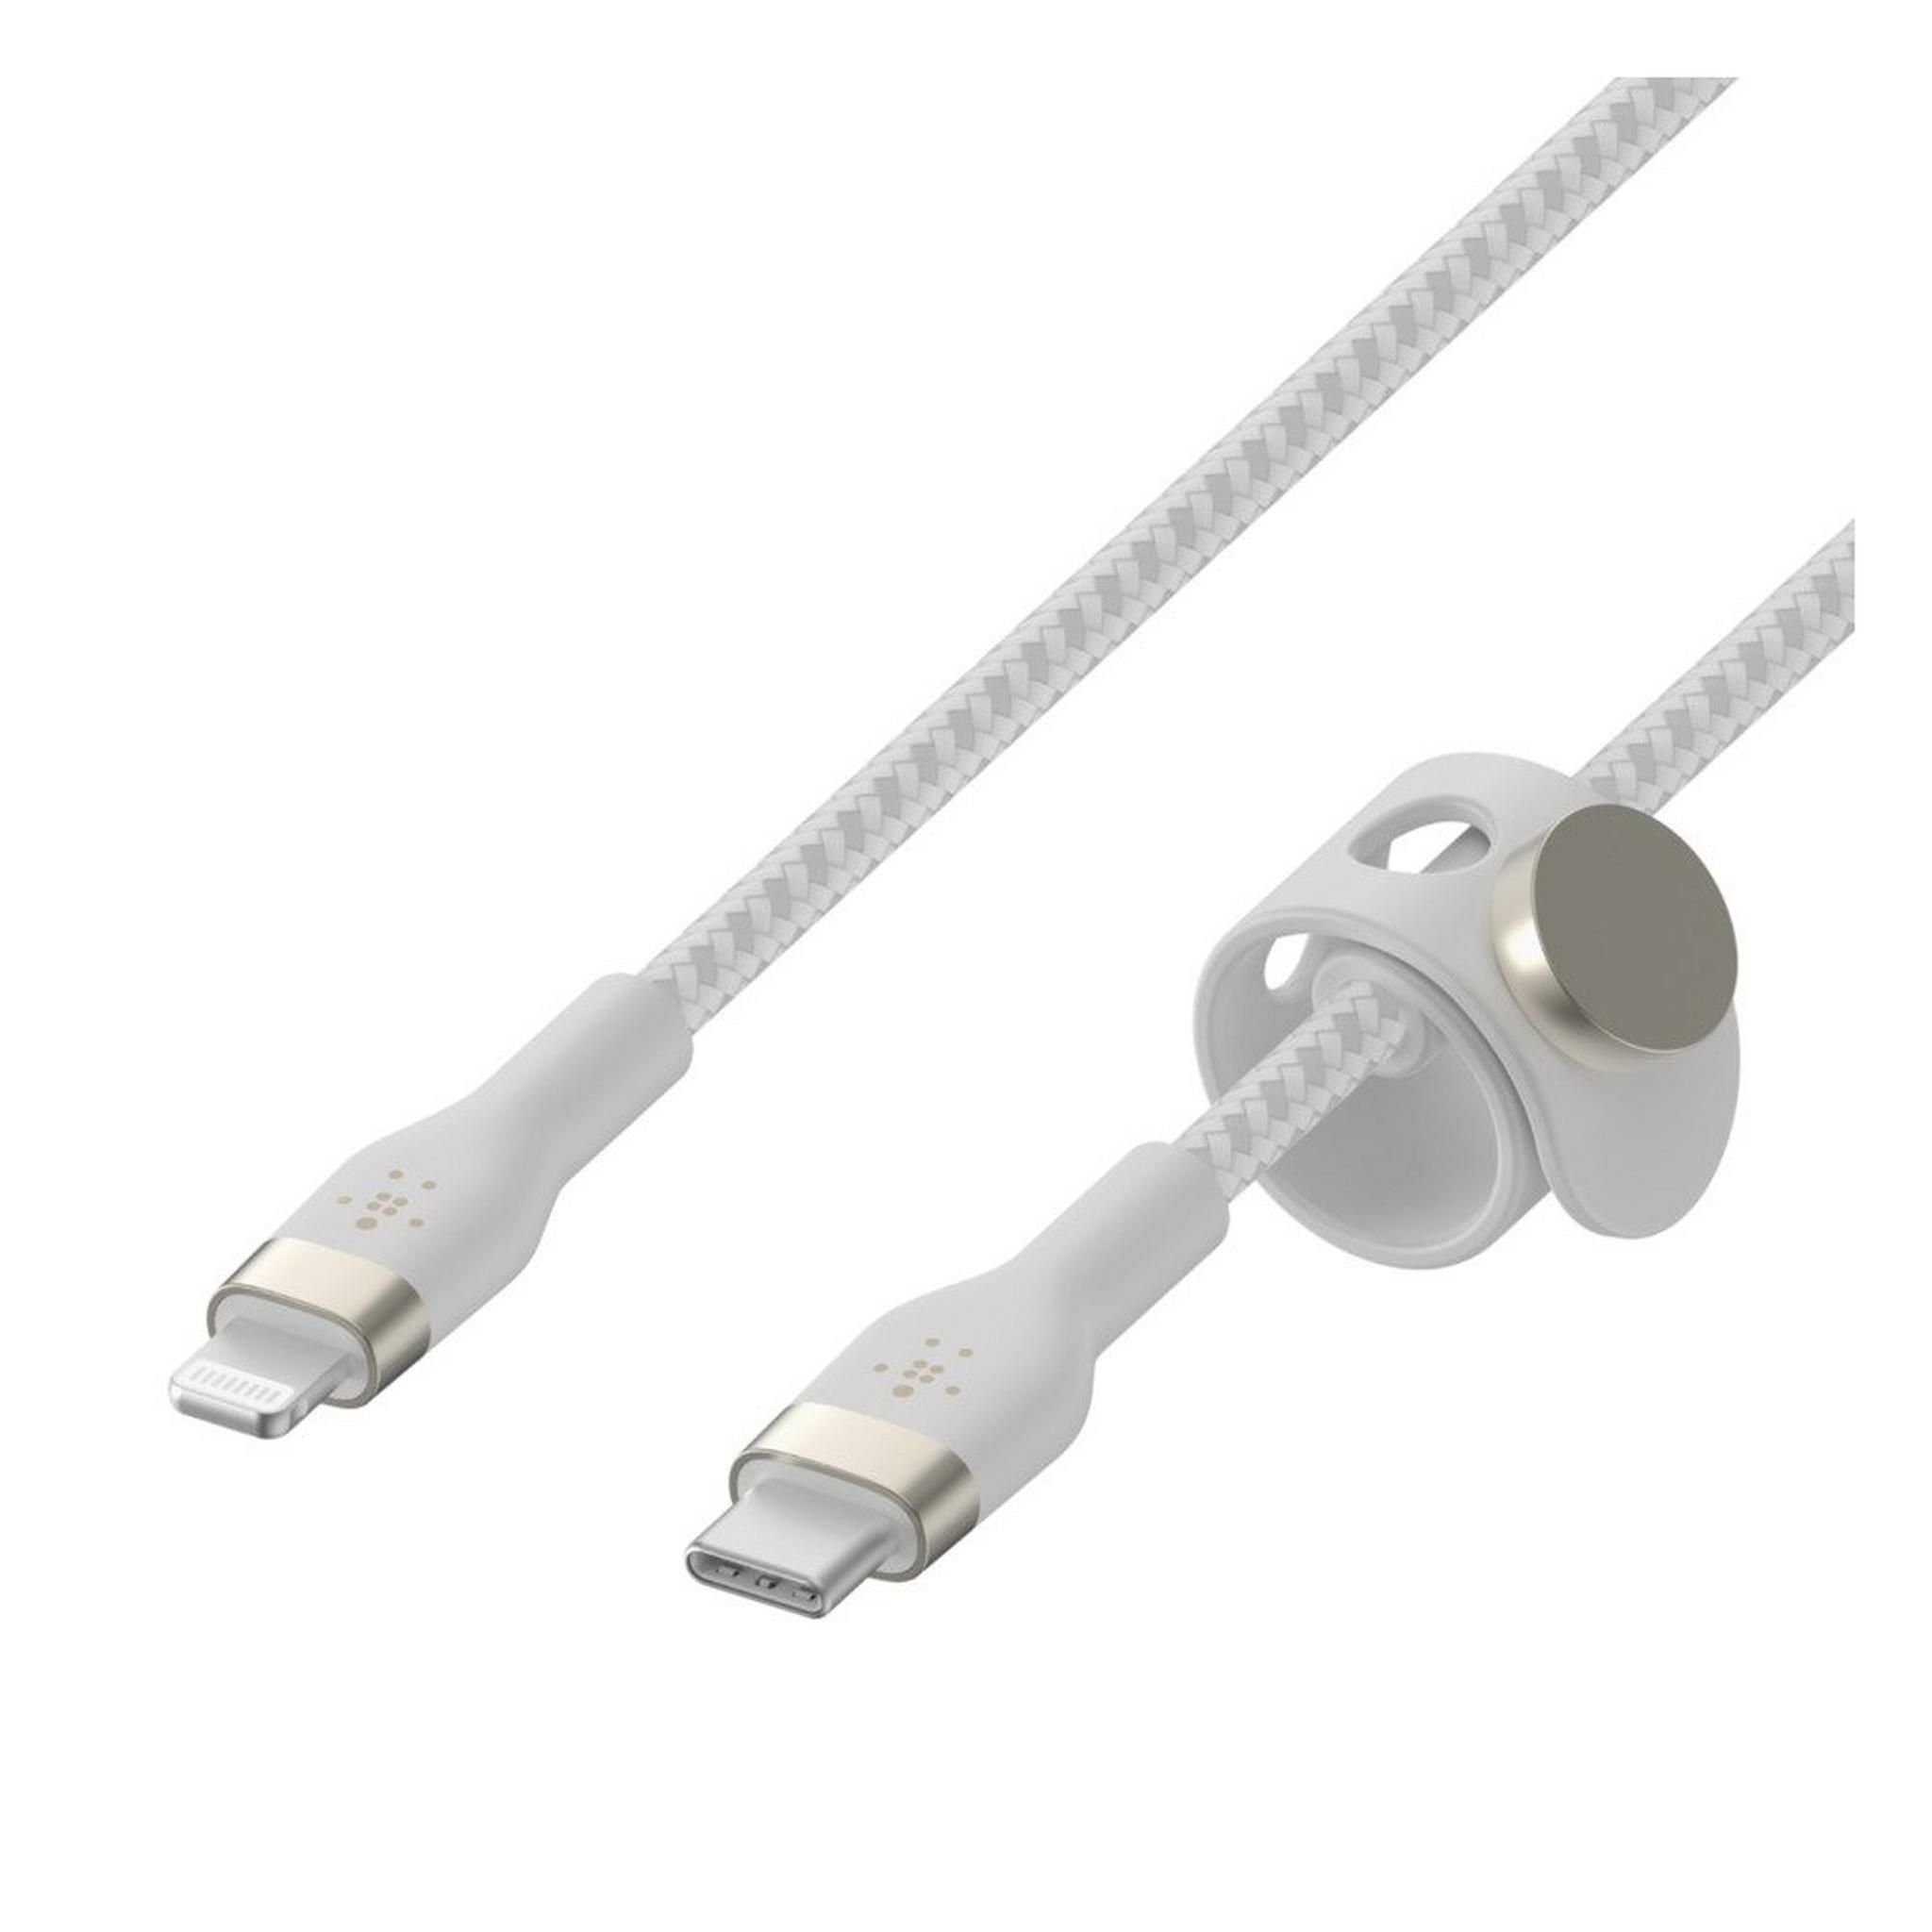 Belkin USB-C to Lightning Cable 1M - White